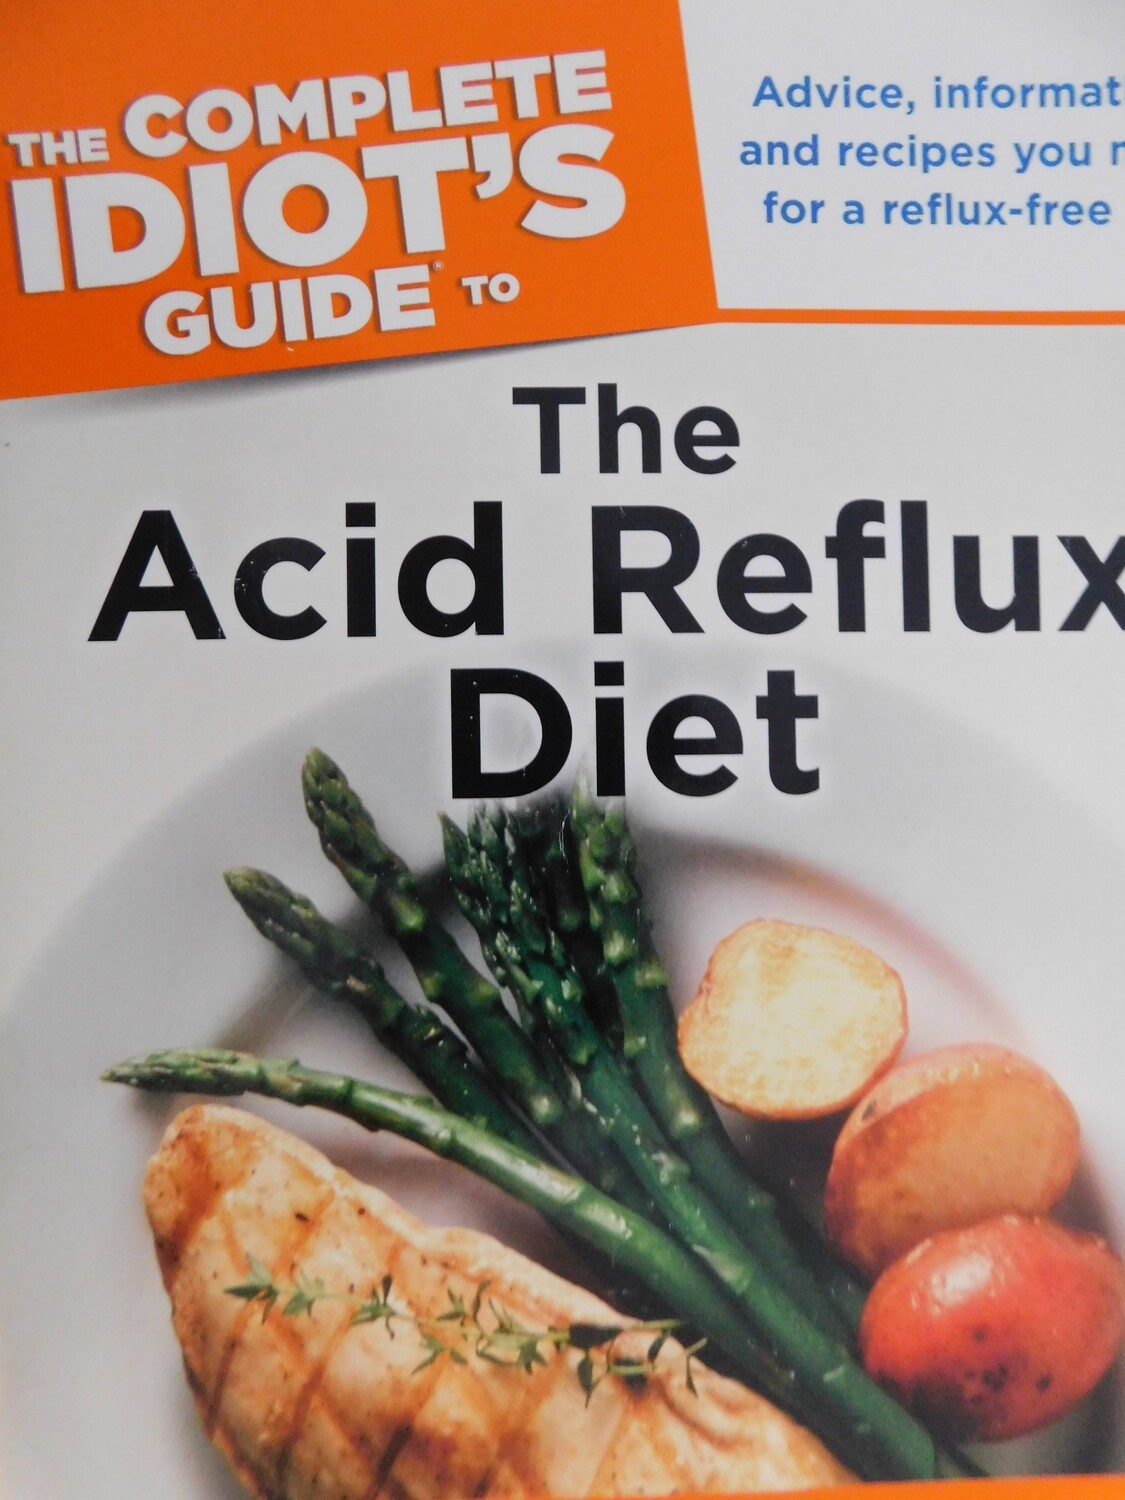 The Complete Idiot's Guide to the Acid Reflux Diet